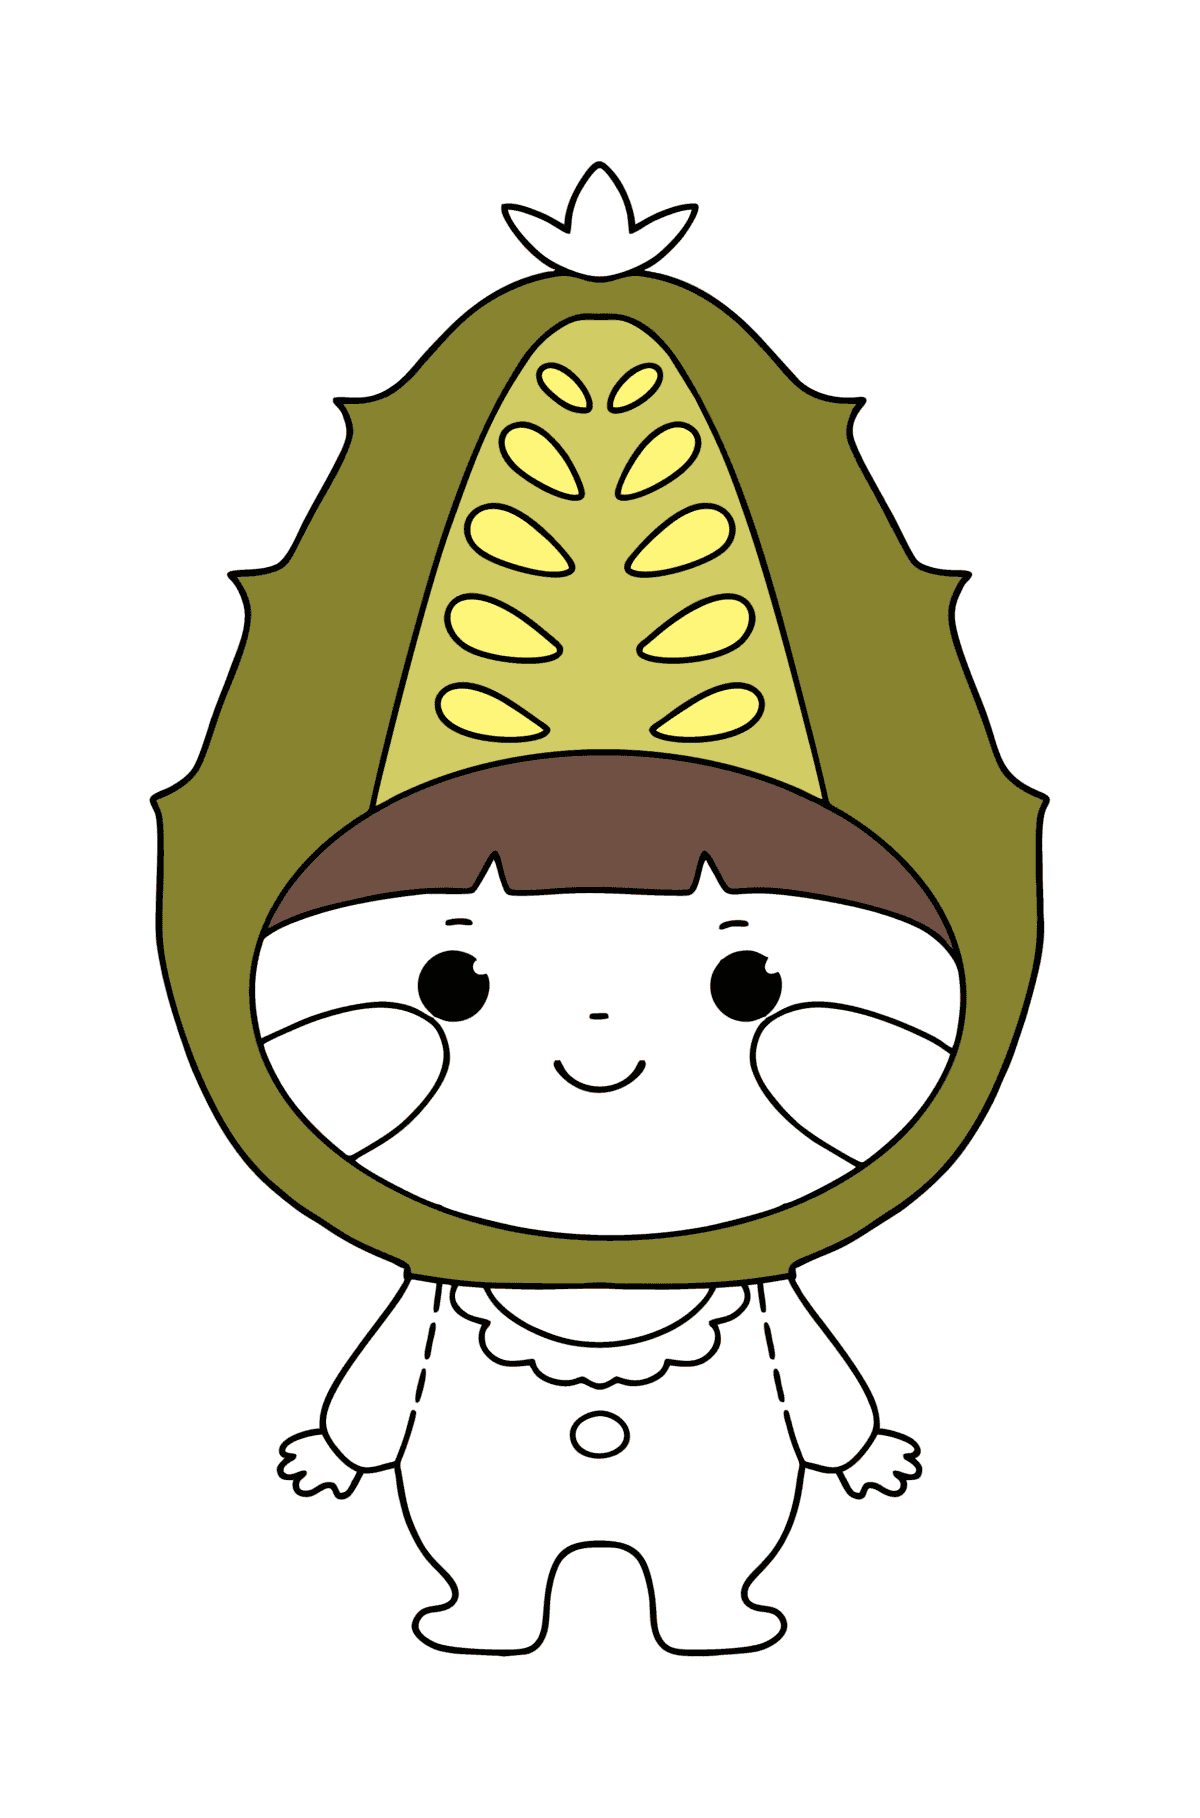 Cucumber suit сoloring page - Coloring Pages for Kids